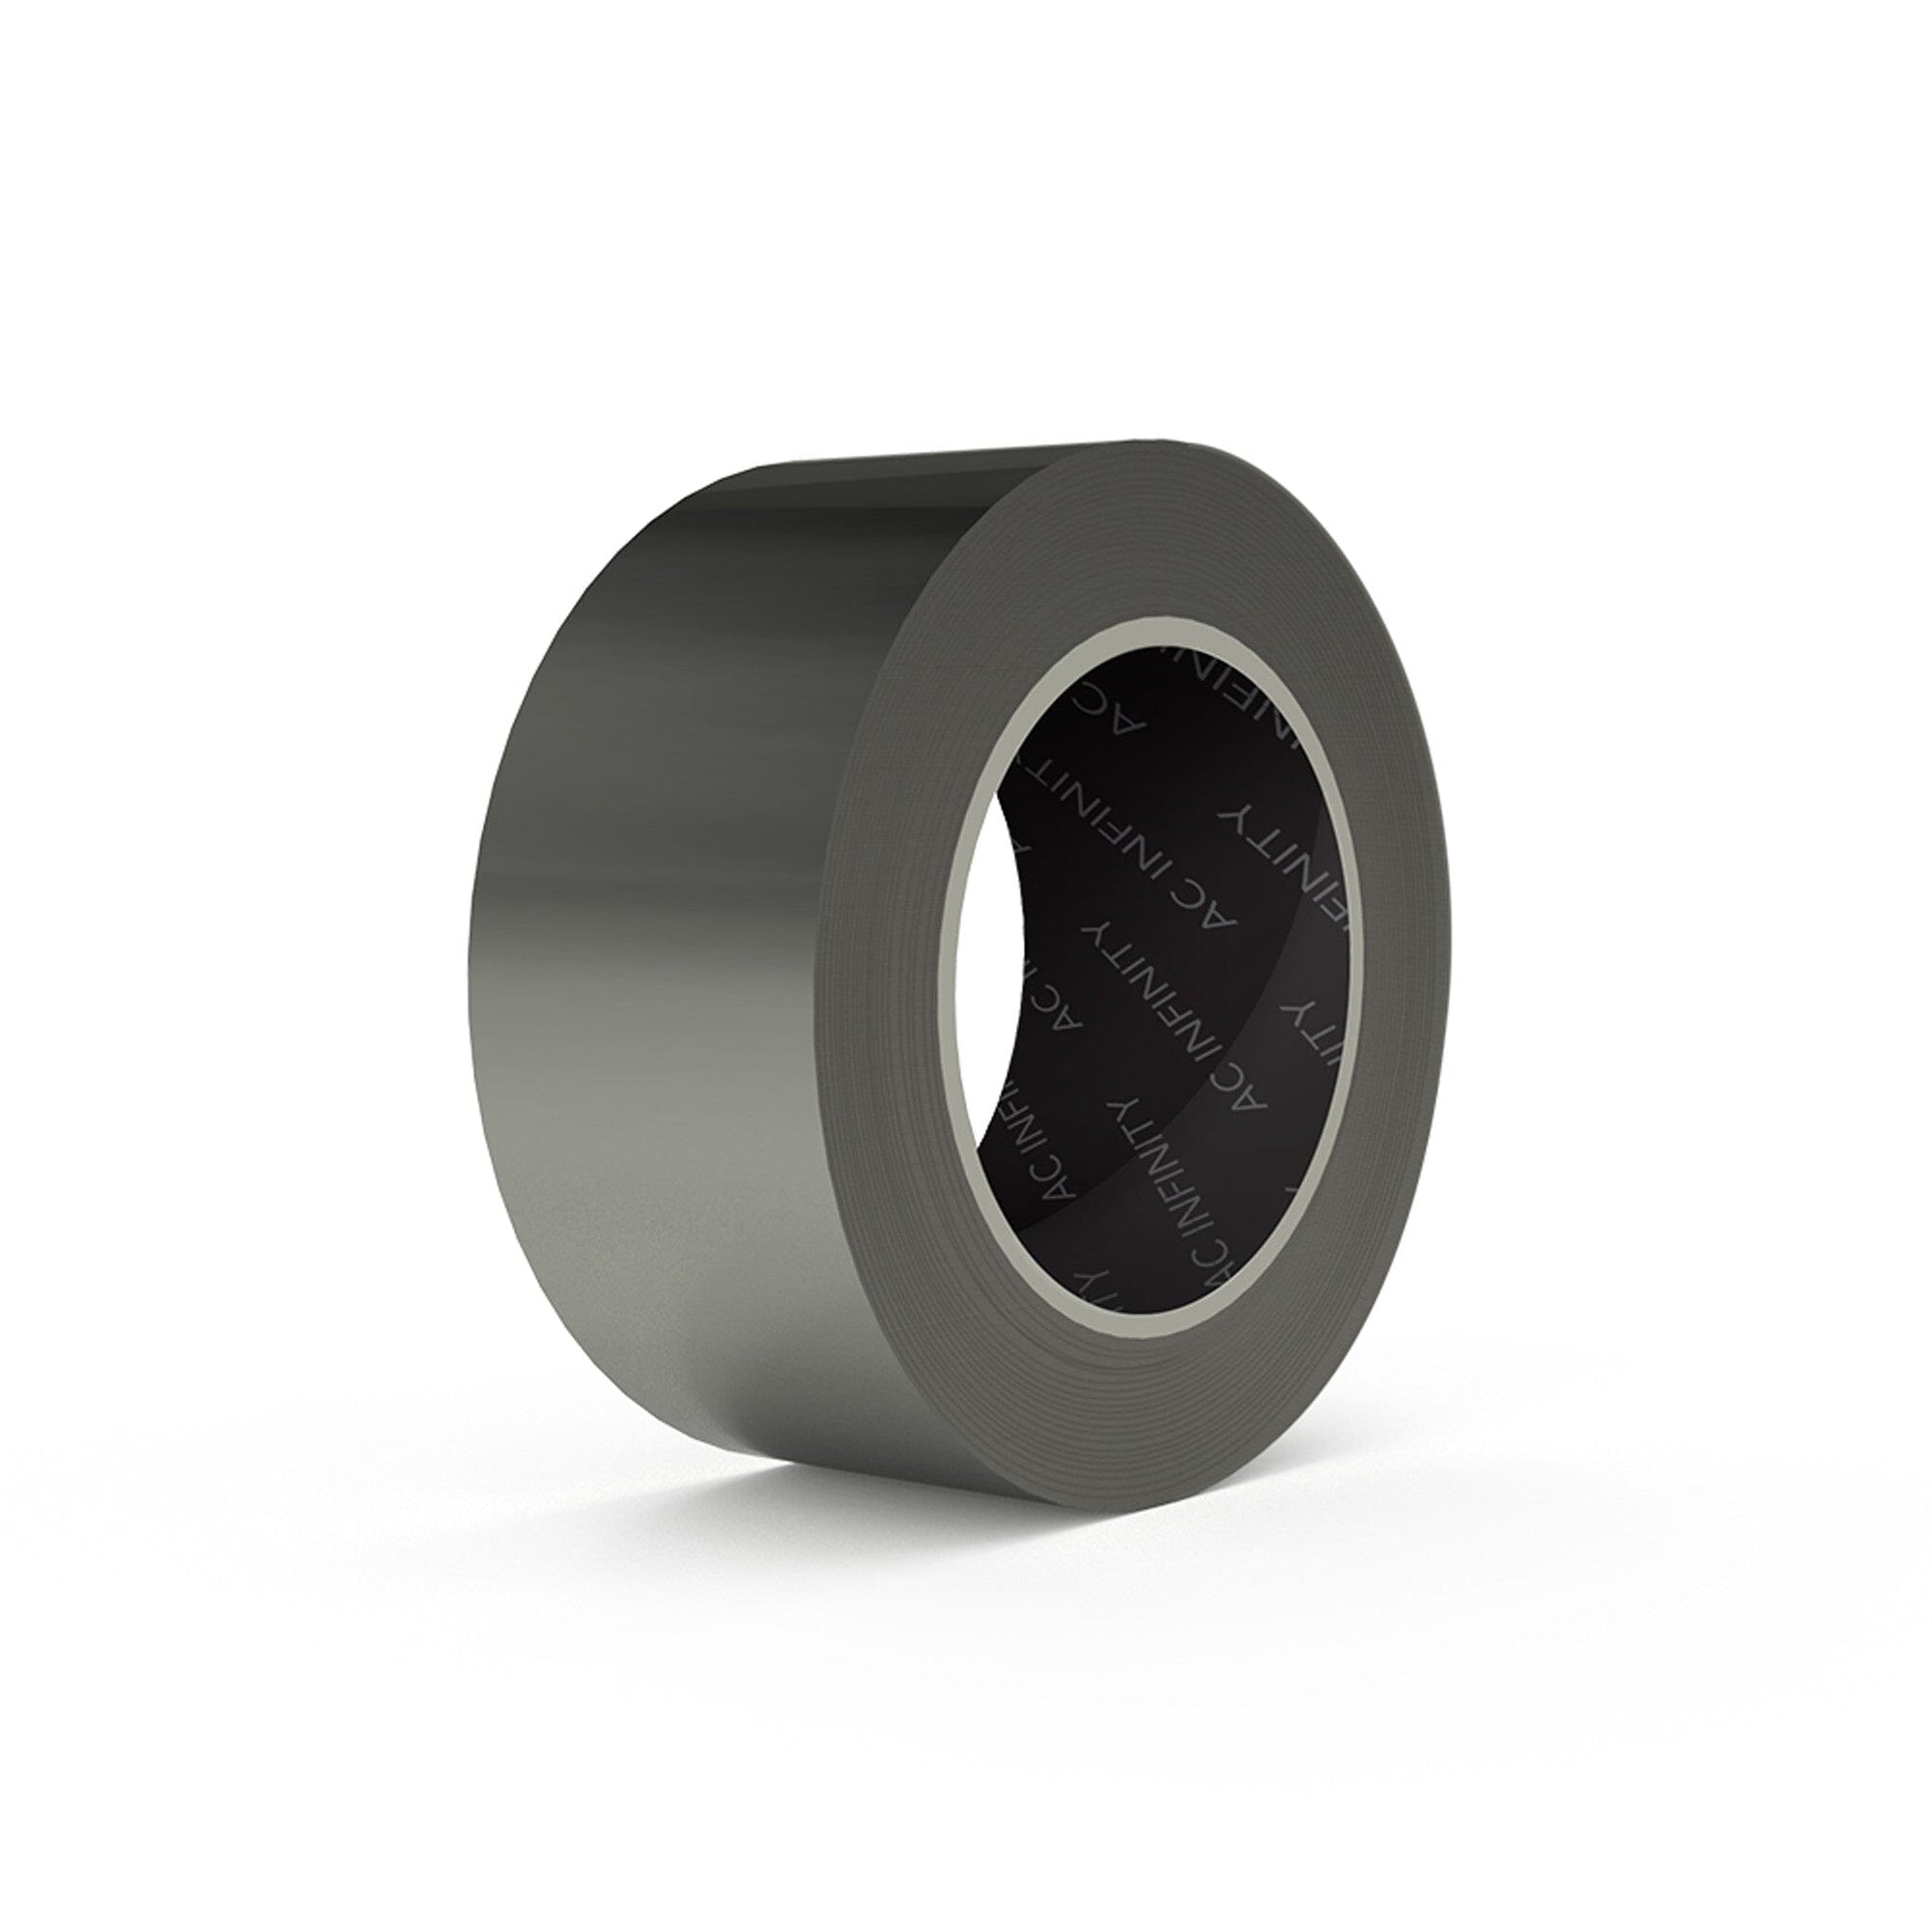 AC Infinity ducting tape